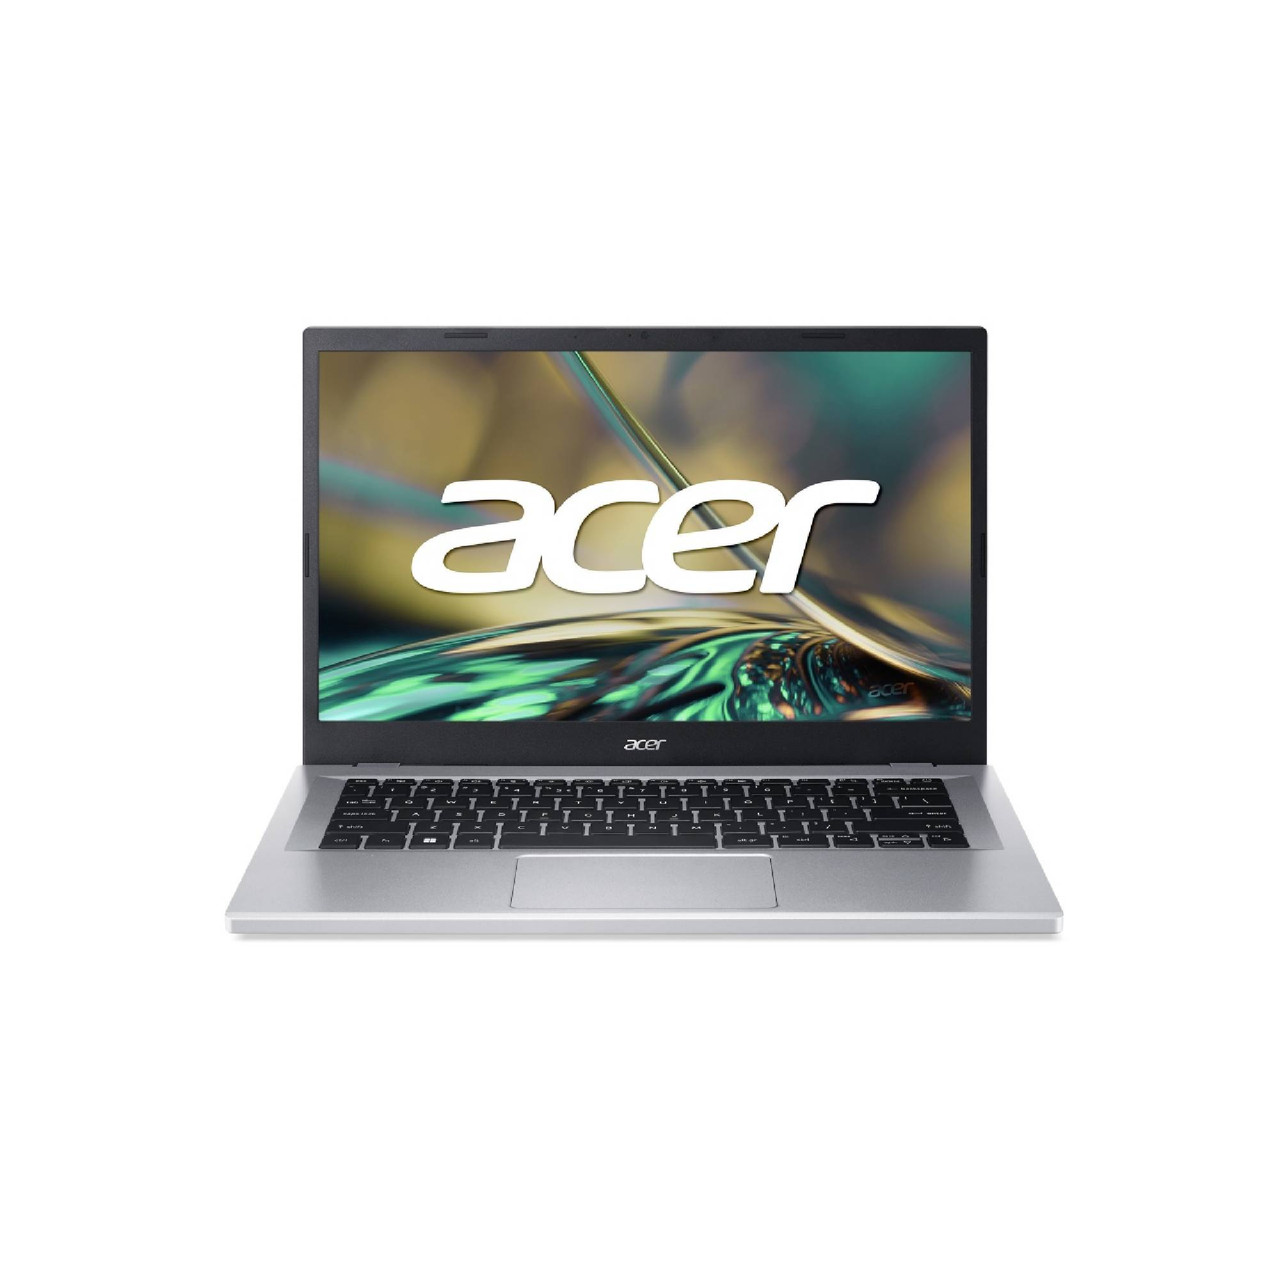 ACER Notebook Acer Aspire 3 A314-36P-30C0-1 Intel Core I3 8 Nucleos 8GB Ram  512GB Ssd 14 Fhd